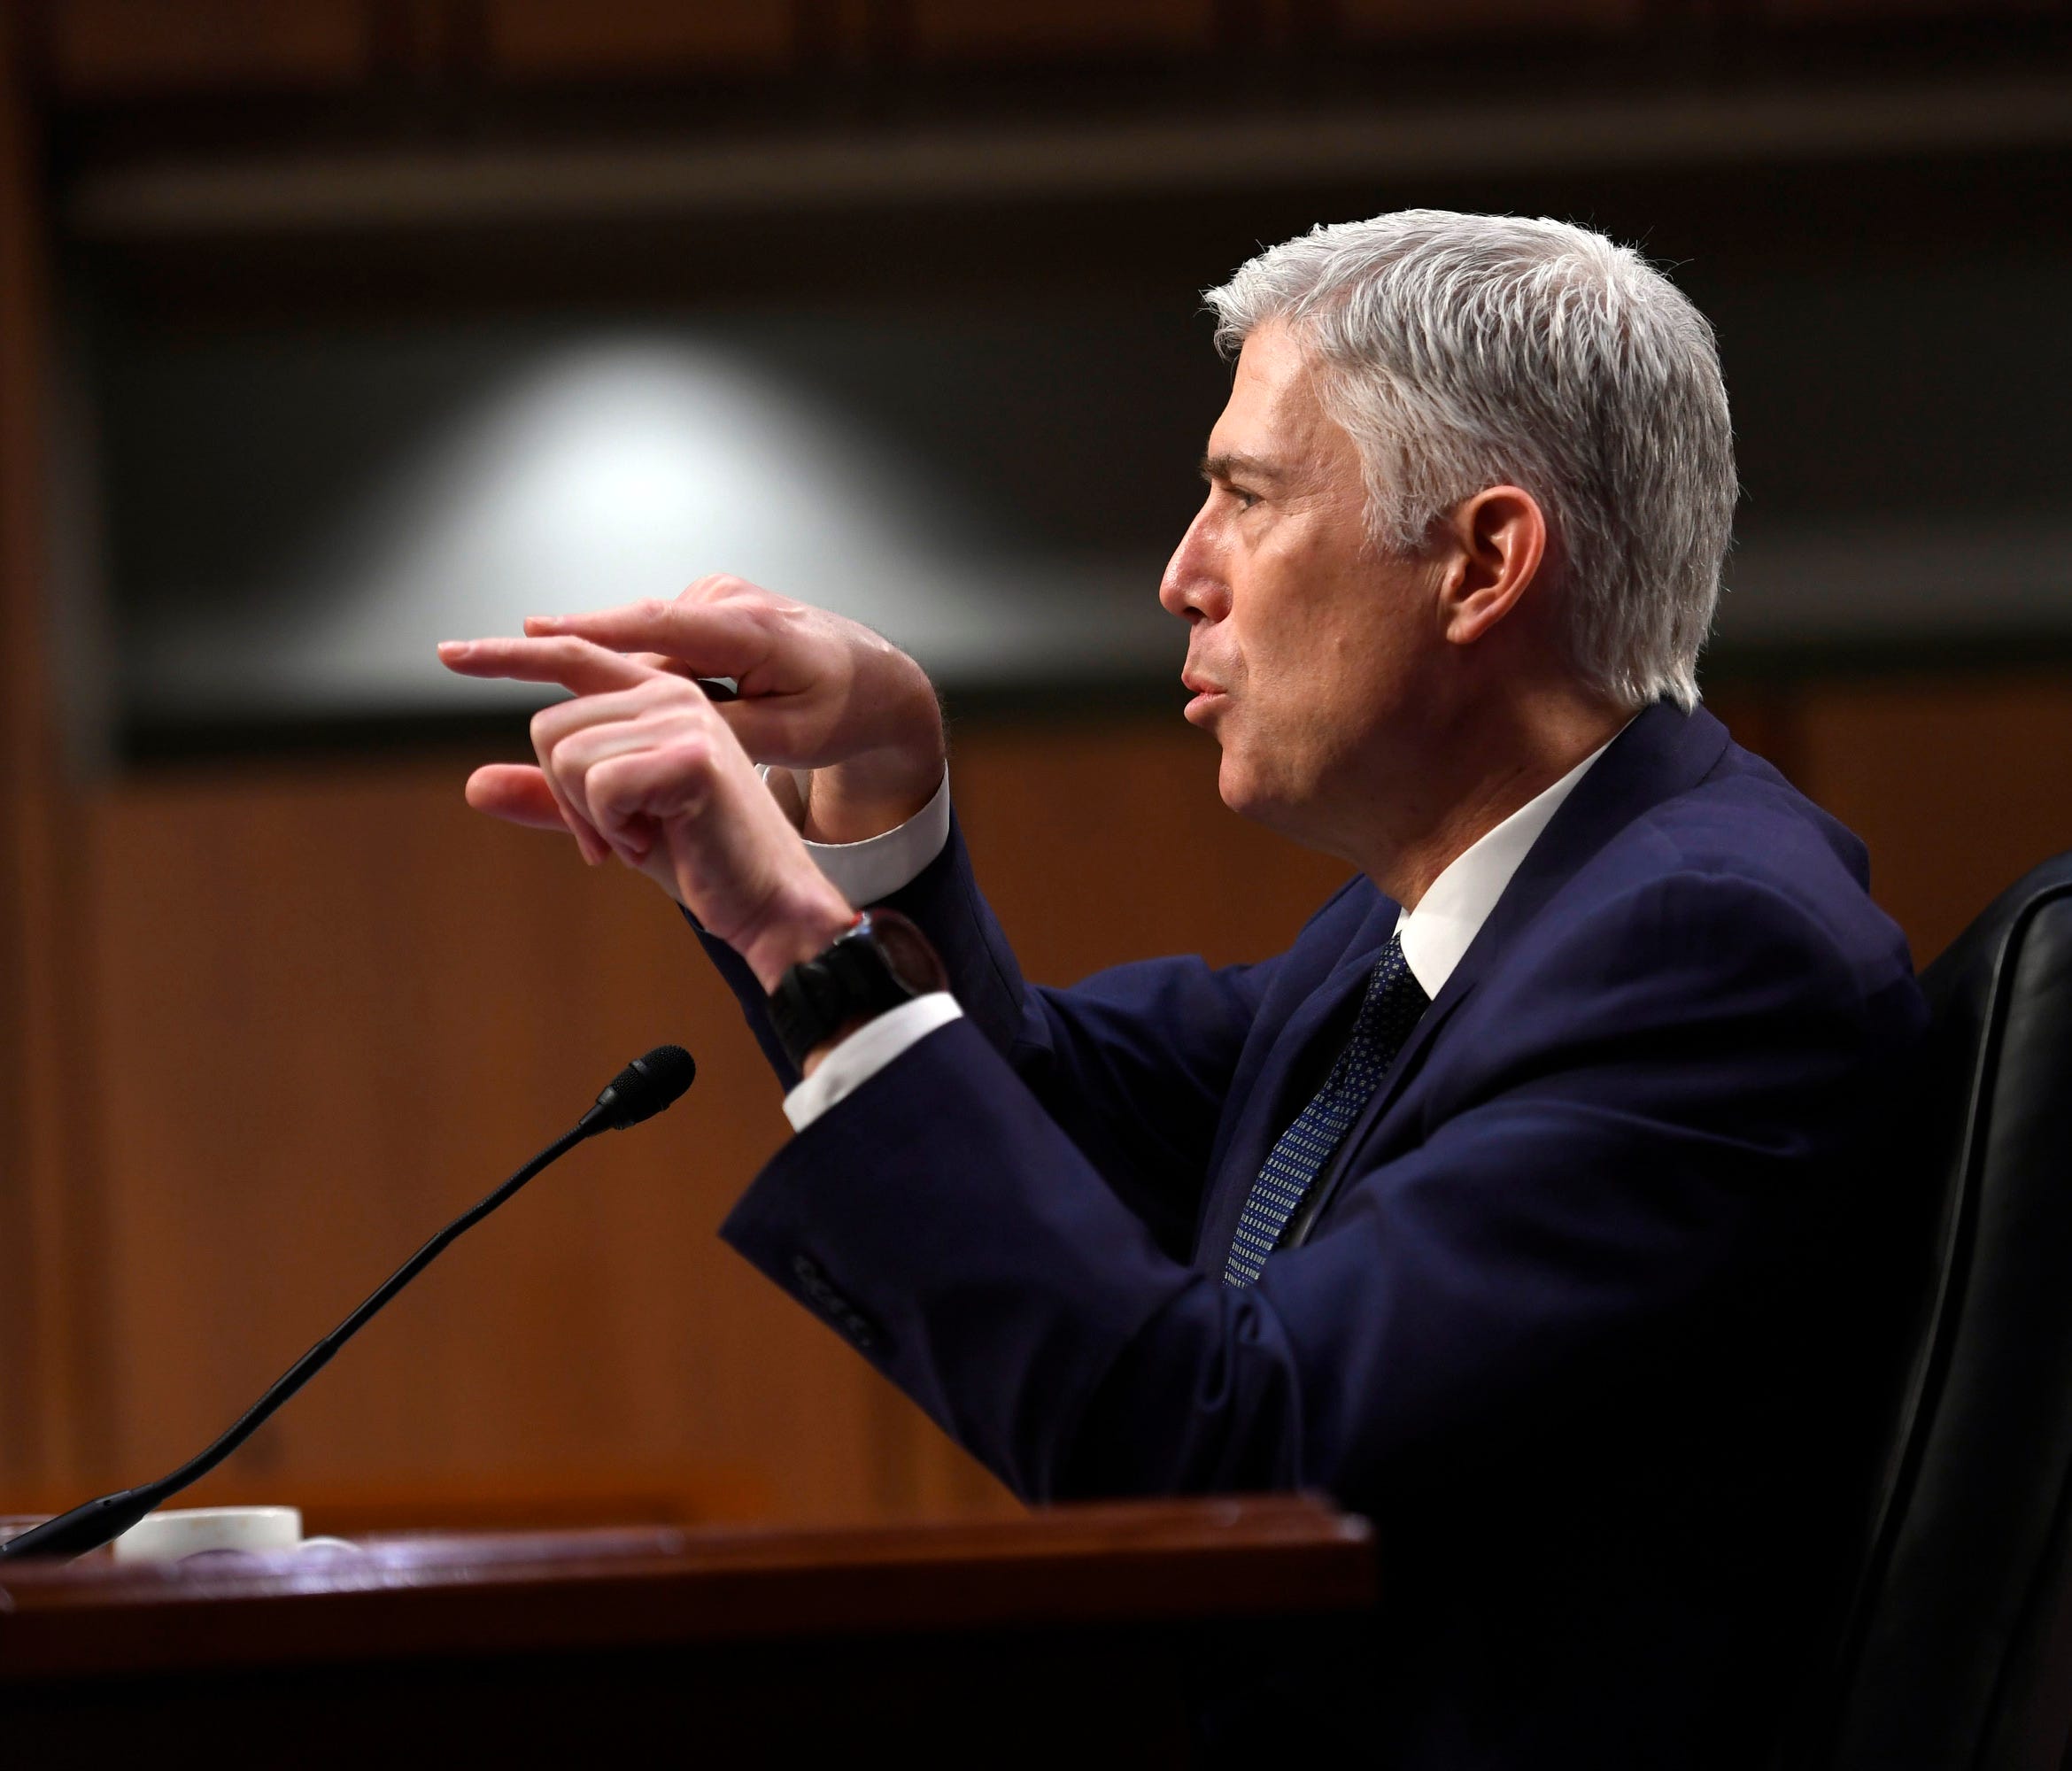 Supreme Court nominee Neil Gorsuch testifies before the Senate Judiciary Committee during day three of his confirmation hearing on March 22, 2017.